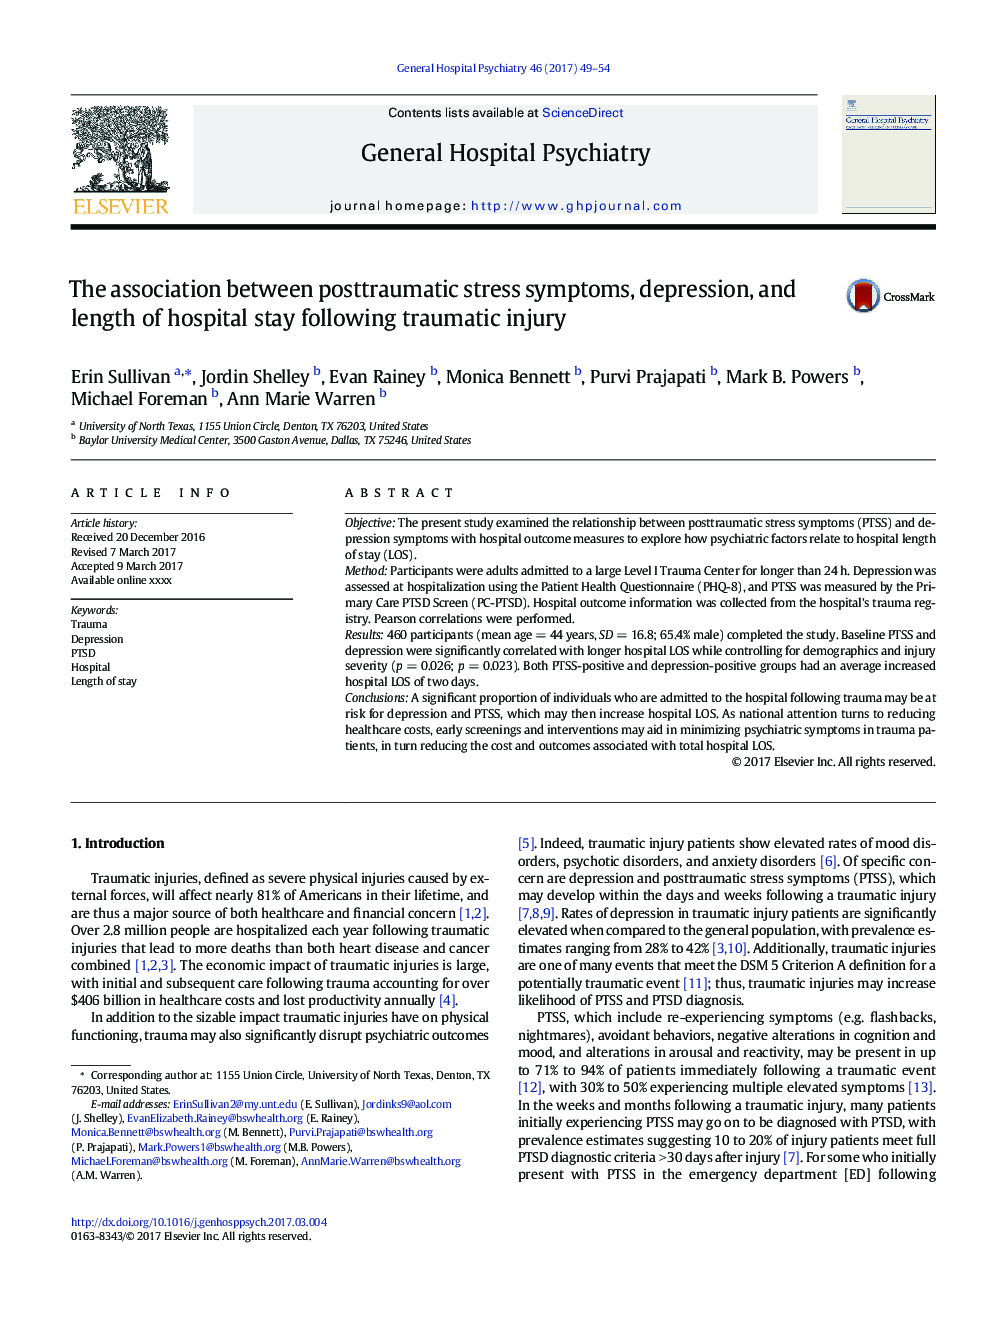 The association between posttraumatic stress symptoms, depression, and length of hospital stay following traumatic injury